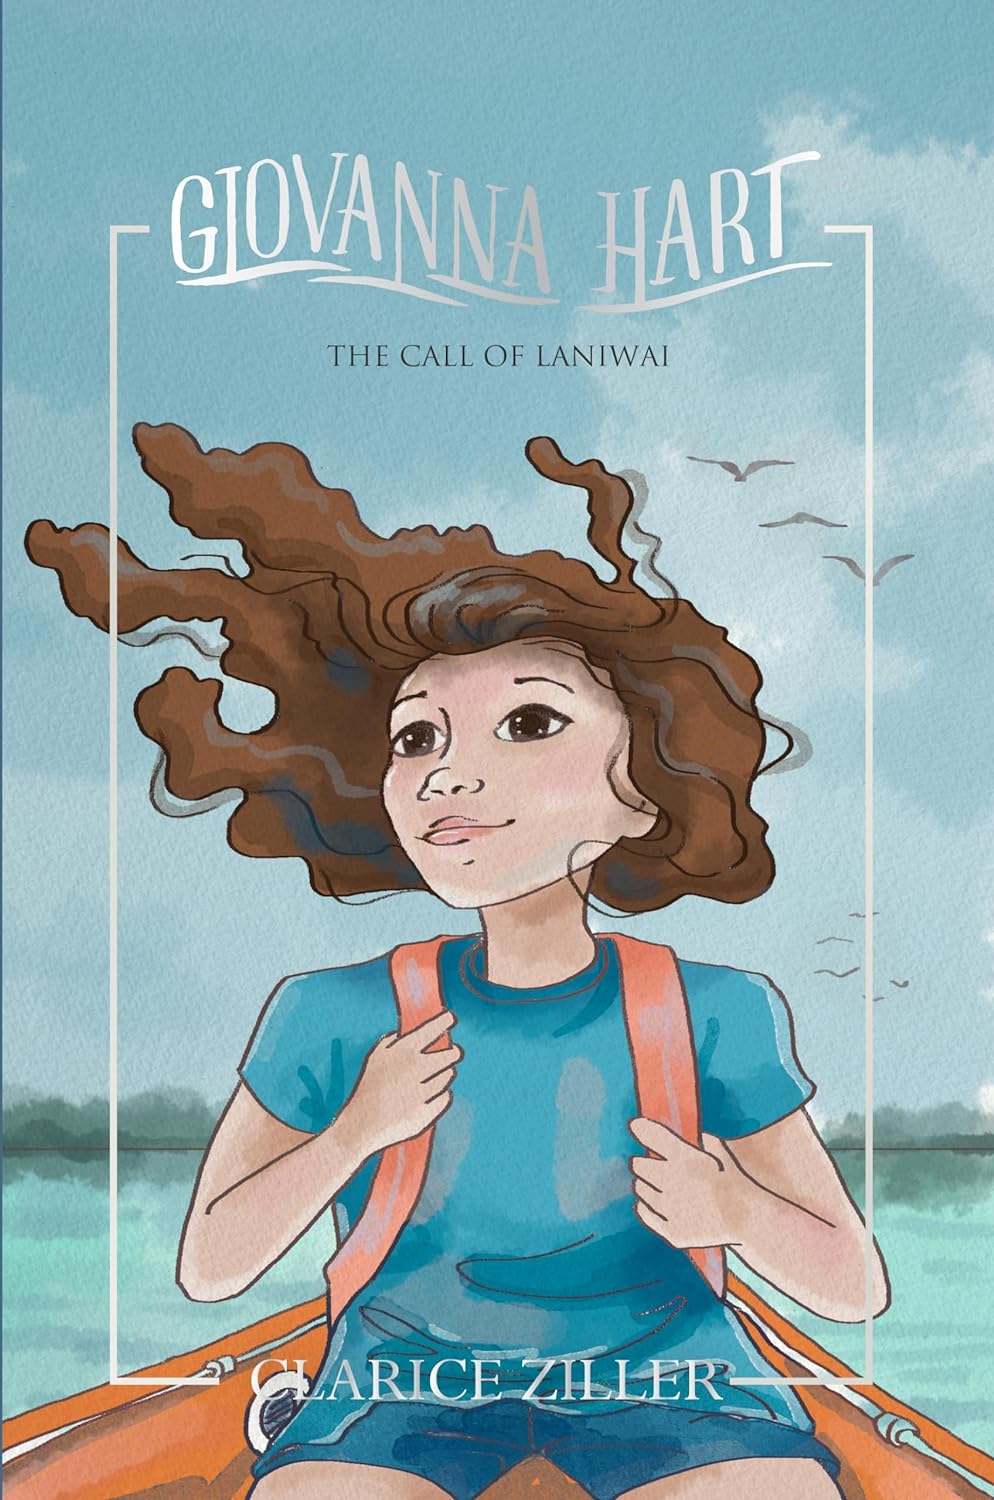 Embark on a Magical Adventure with "Giovanna Hart: The Call of Laniwai" - An Adorable Tale of Faith, Courage, Friendship, Hope and Love